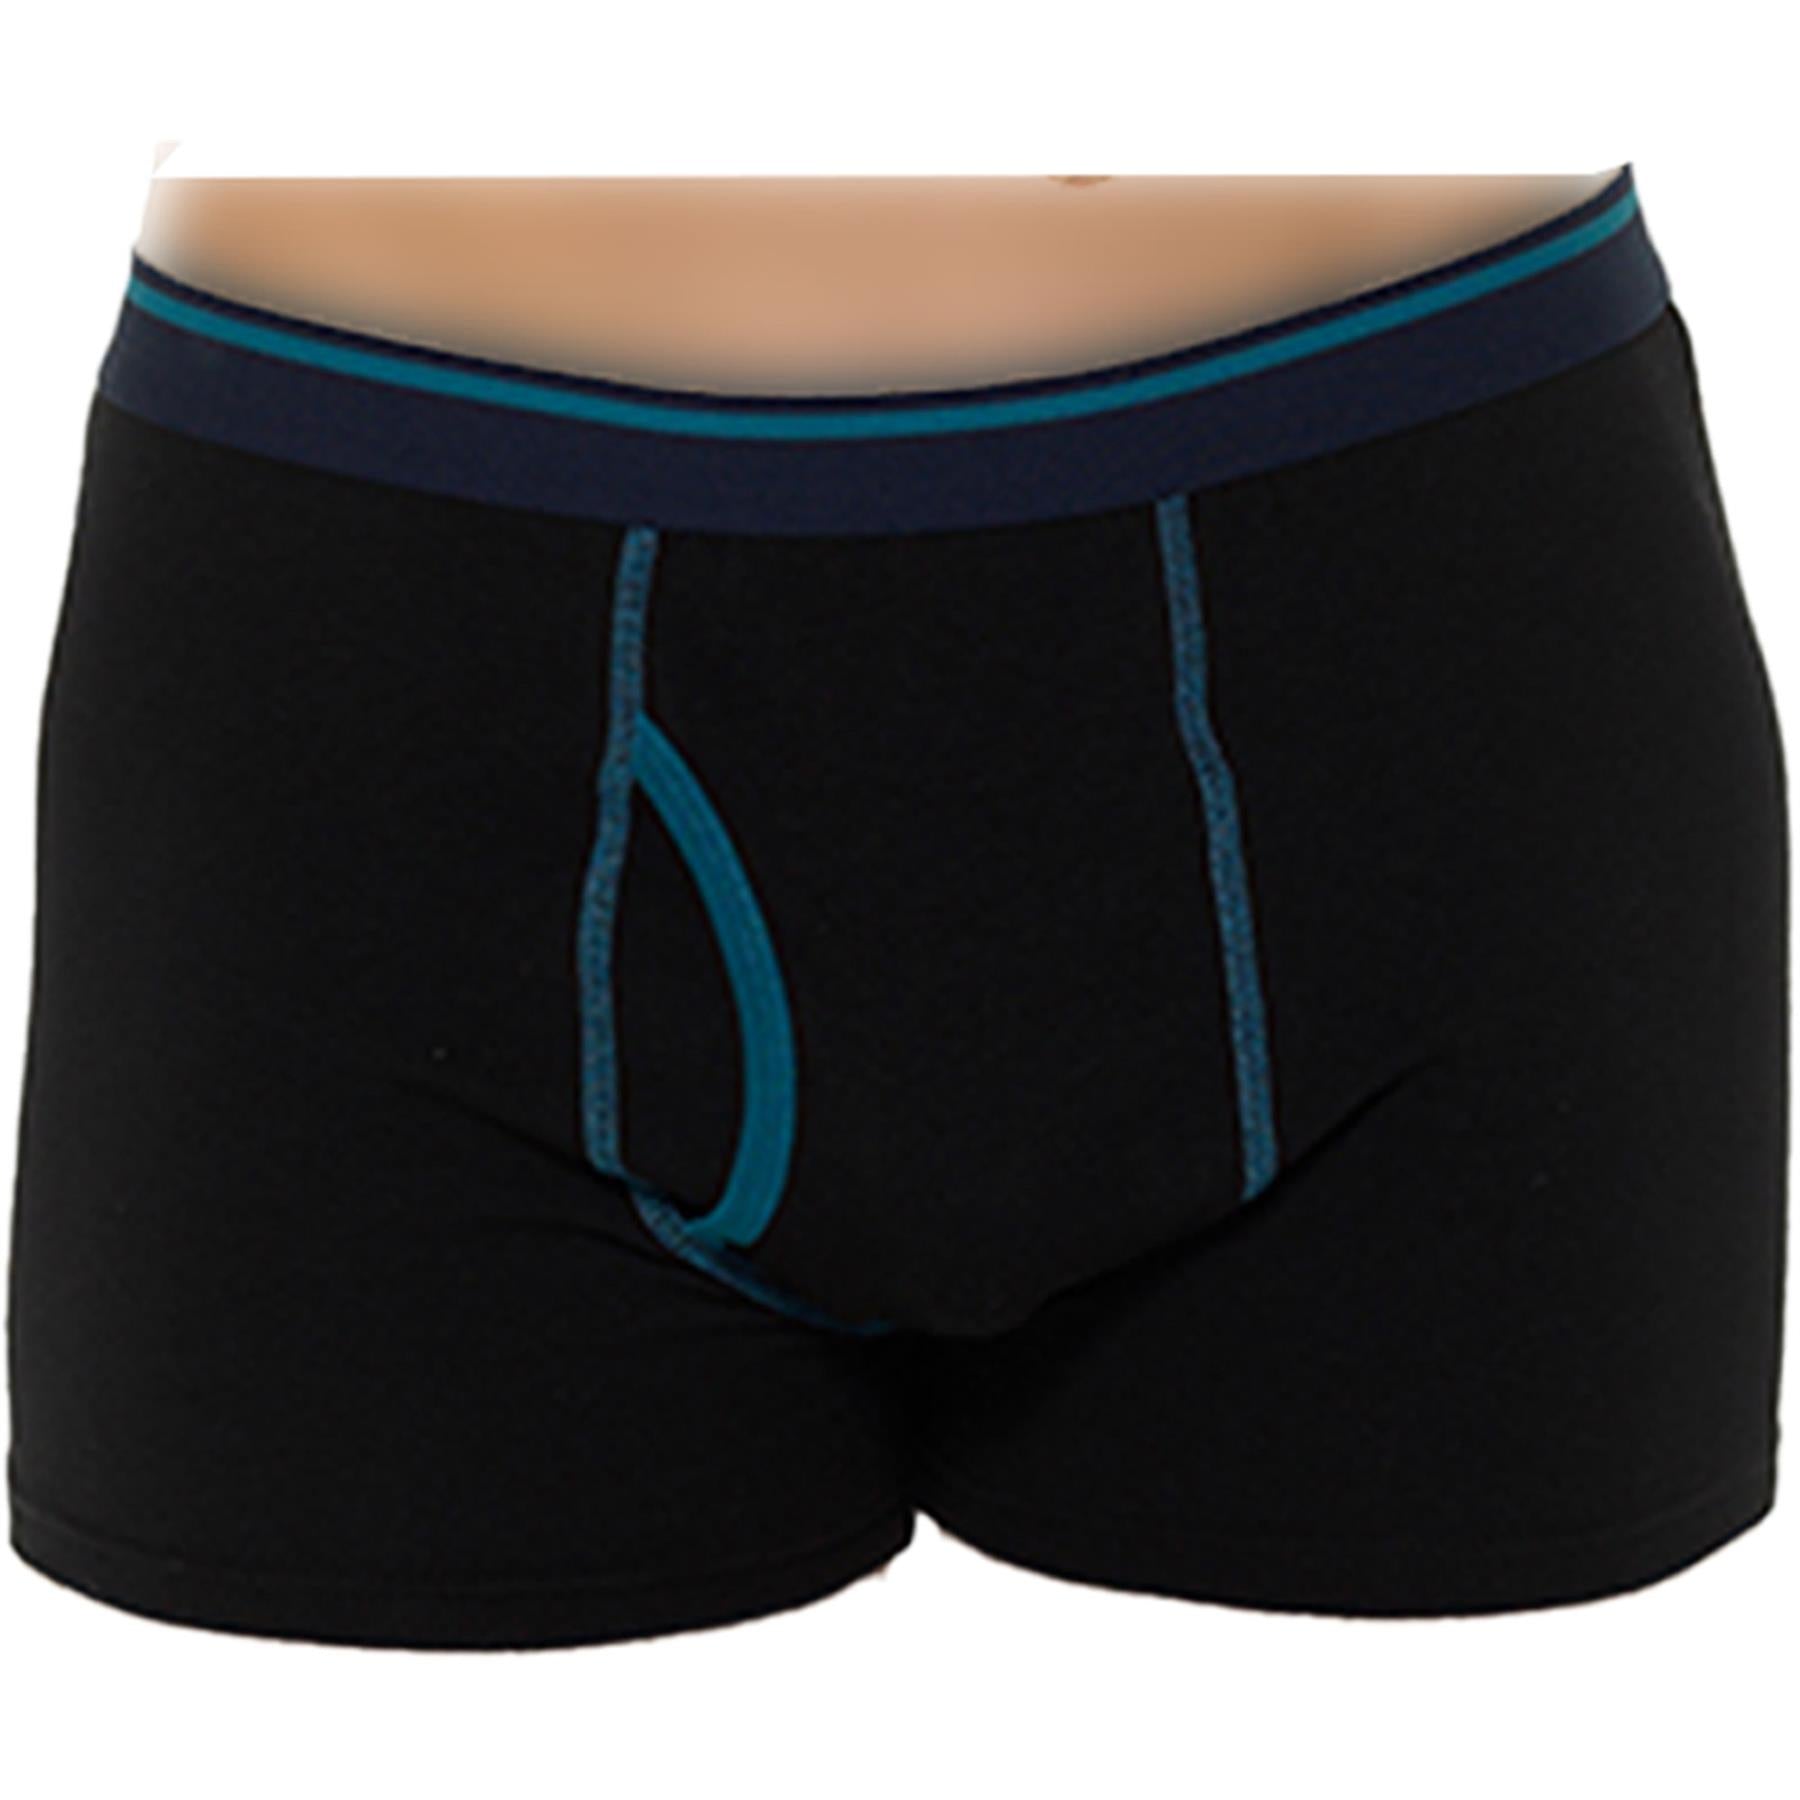 Mens Keyhole Trunks Shorts Underwear Pack Of 3 Knickers Elasticated Waistband